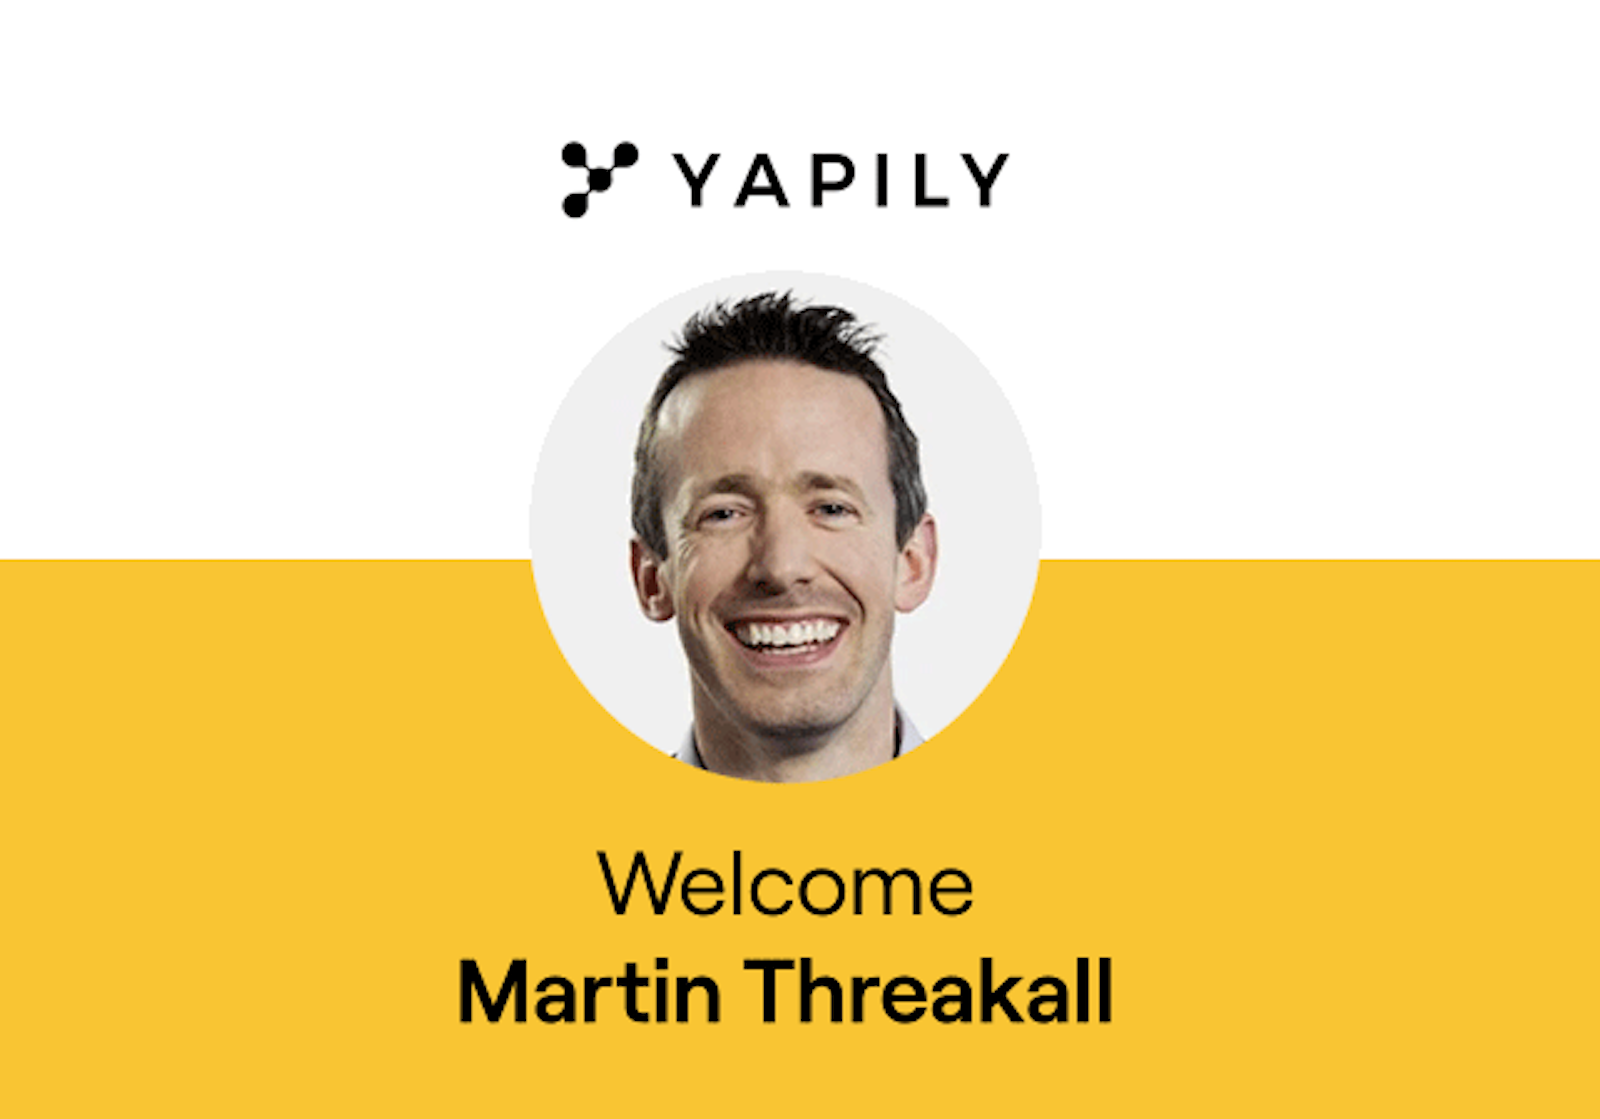 Martin Threakall joins the Yapily team as Chief Operating Officer (COO). Martin brings over a decade’s expertise in growing payment start-up and scale-up businesses and will help lead Yapily’s European expansion and supercharge the FinTech’s growth.